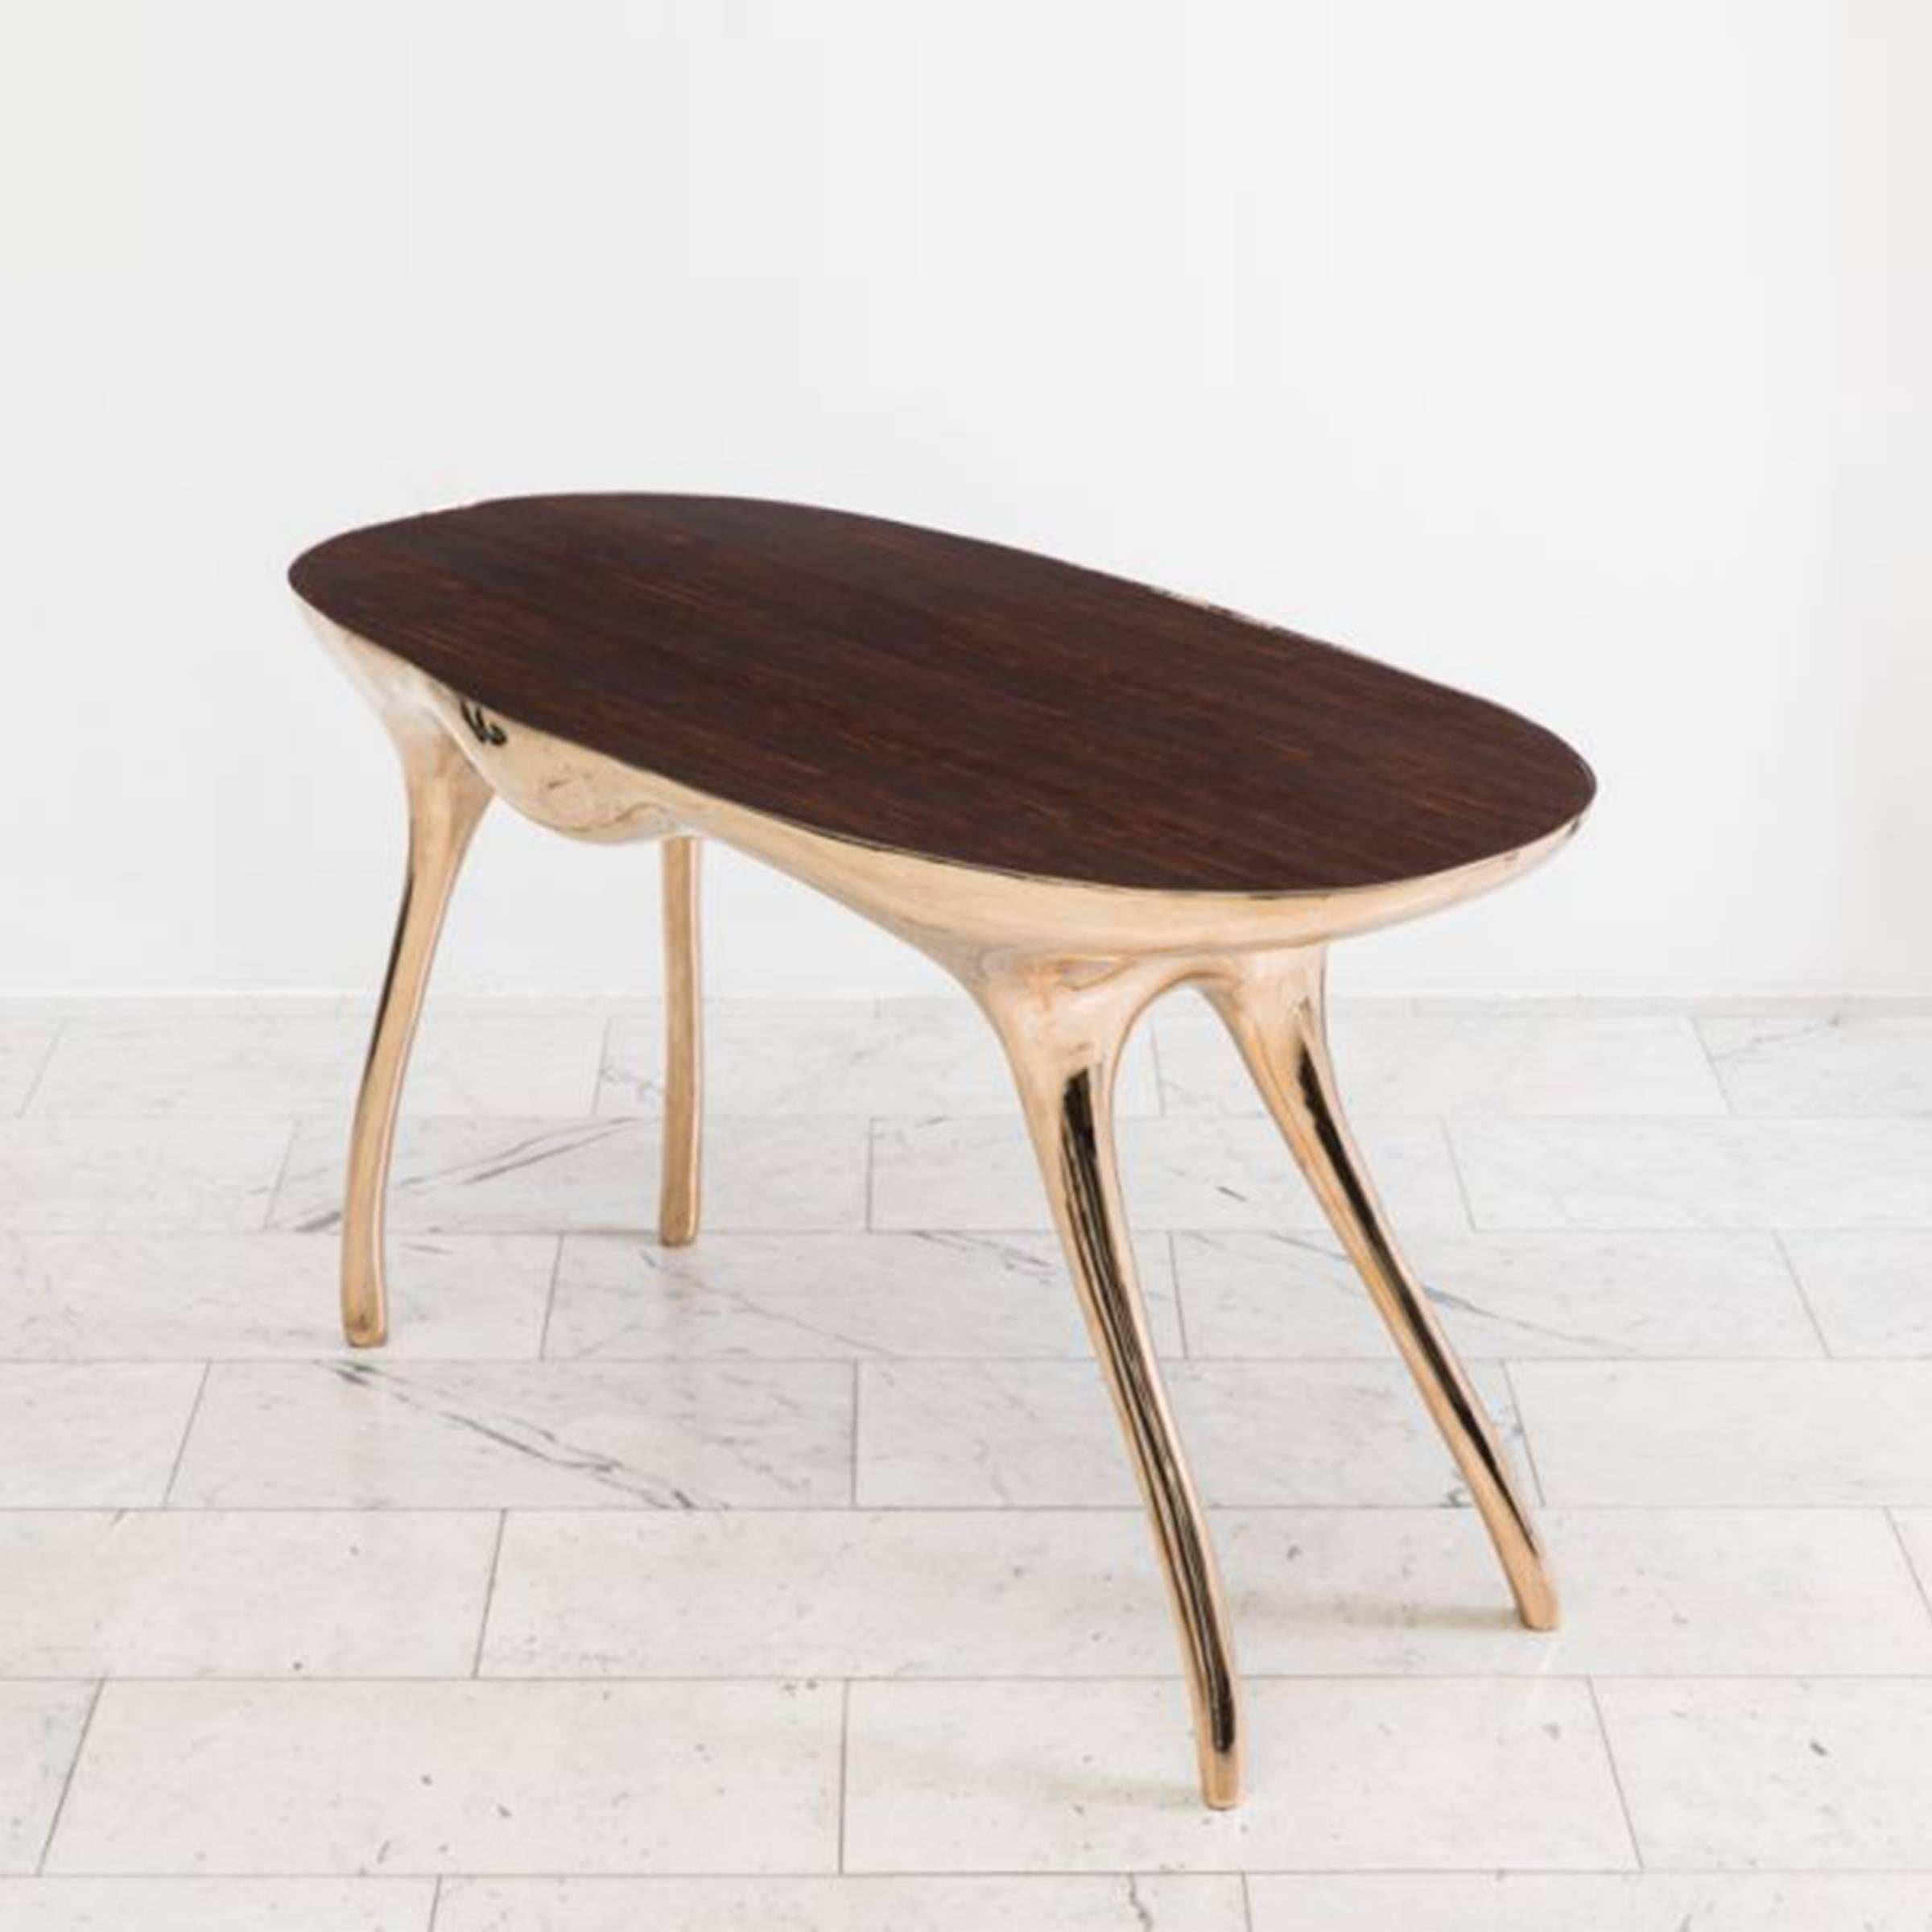 Inspired by Alex Roskin’s L’éléphant Console, the Biche Desk reflects the artist’s modernist and primitivist influences.

The desk’s muscular sculpted shape is cast in bronze, and polished to a mirror finish. The base of the table, bowed and